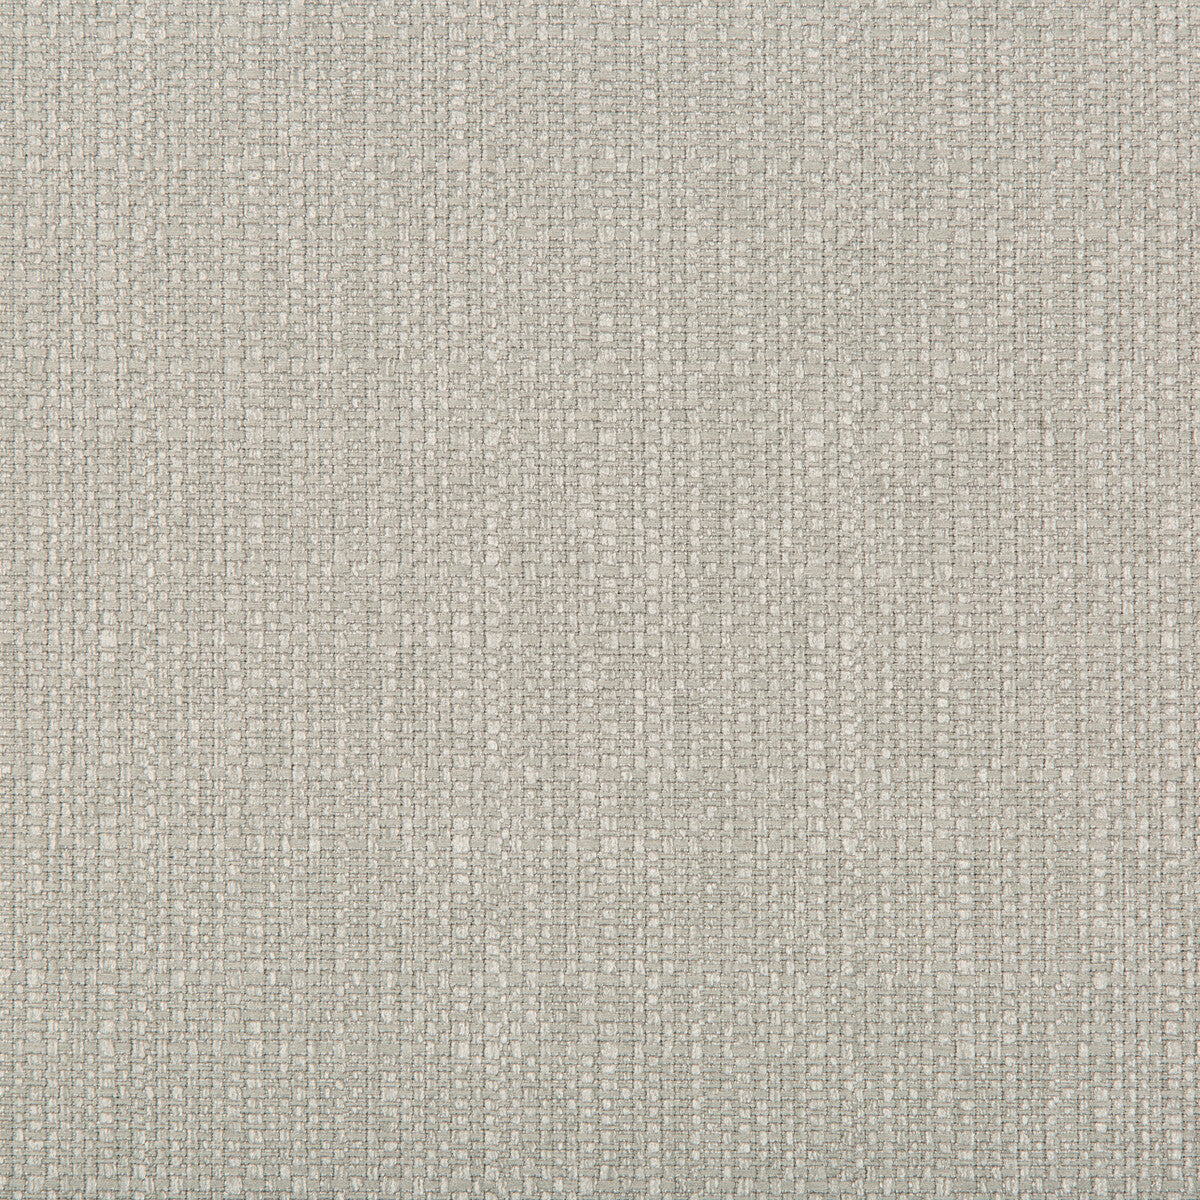 Kravet Contract fabric in 35472-11 color - pattern 35472.11.0 - by Kravet Contract